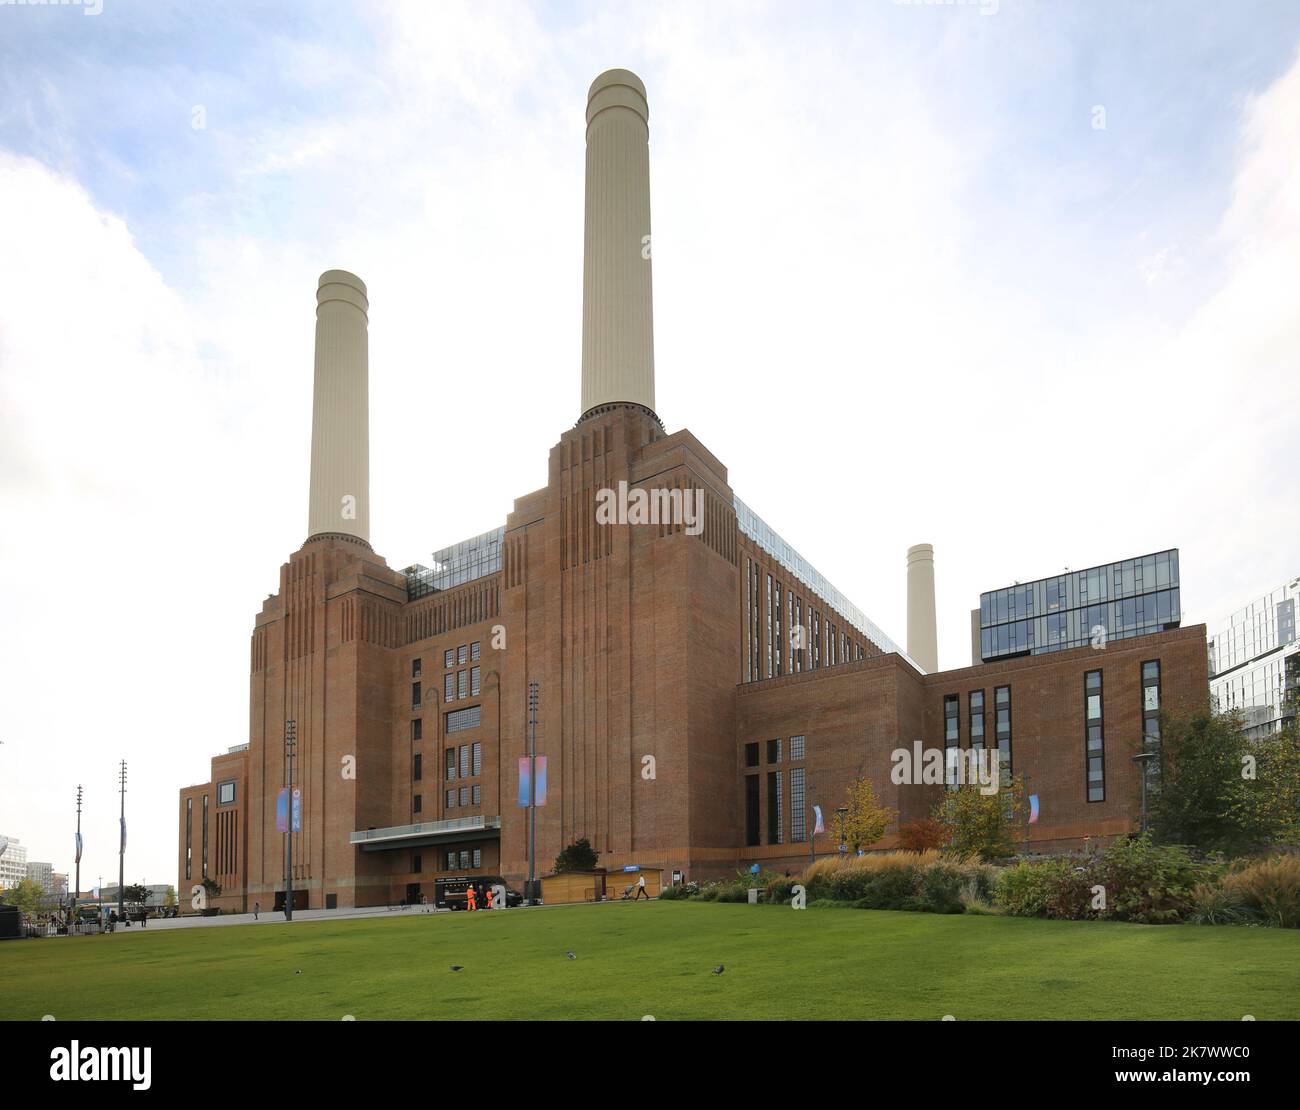 Exterior view of the newly opened Battersea Power Station redevelopment, London, UK. Opened October 2022. Shows riverside park and entrance. Stock Photo